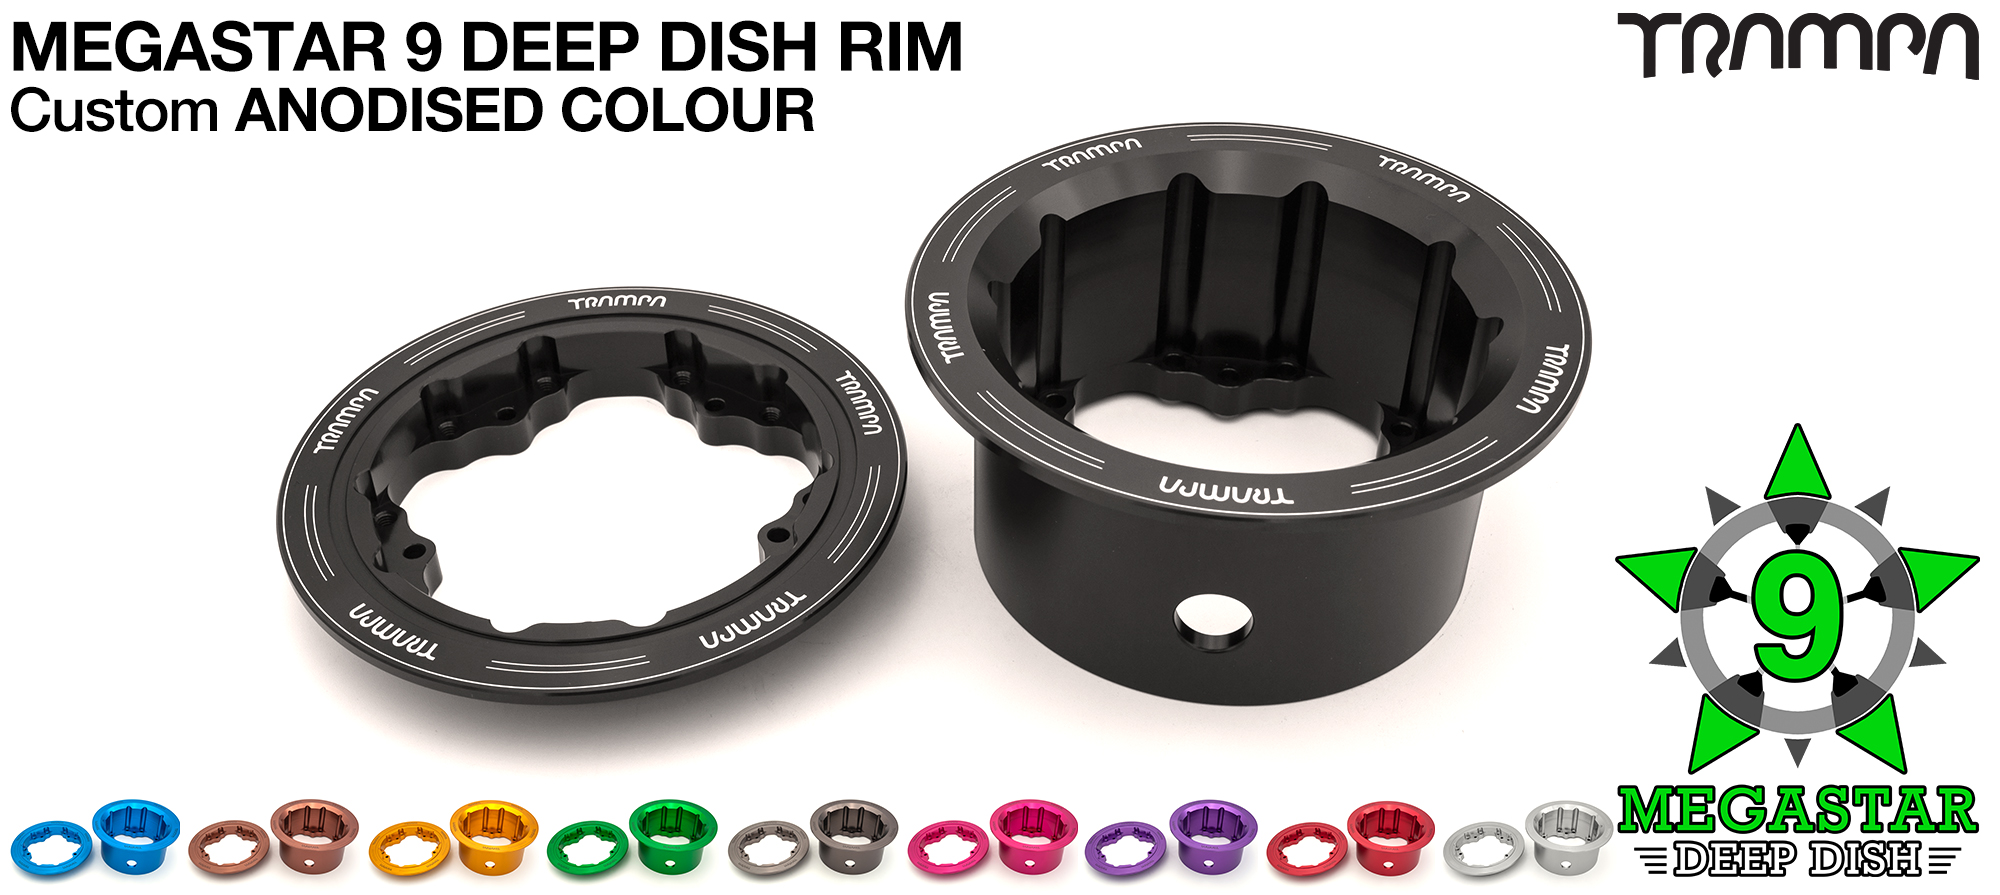 MEGASTAR 9 DEEP-DISH Rims Measure 3.75/4x 3 Inch. The Bearings are positioned OFF-SET & accept 4 Inch Rim Tyres to make 9 or 10 inch Wheels